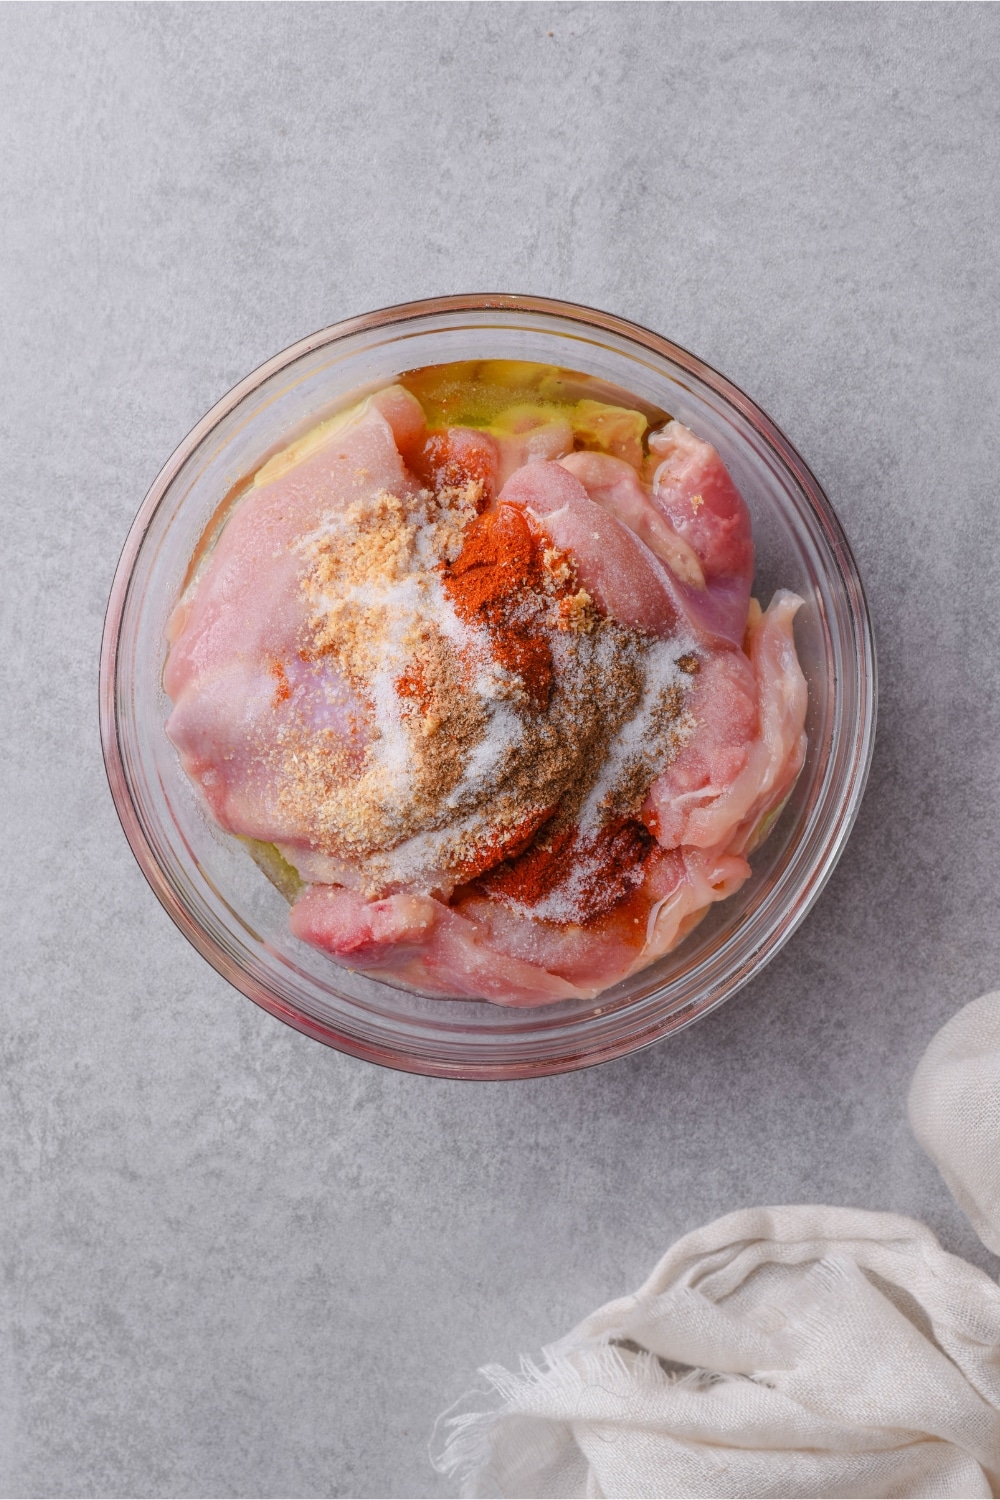 A glass bowl of raw boneless skinless chicken thighs with seasoning and oil.